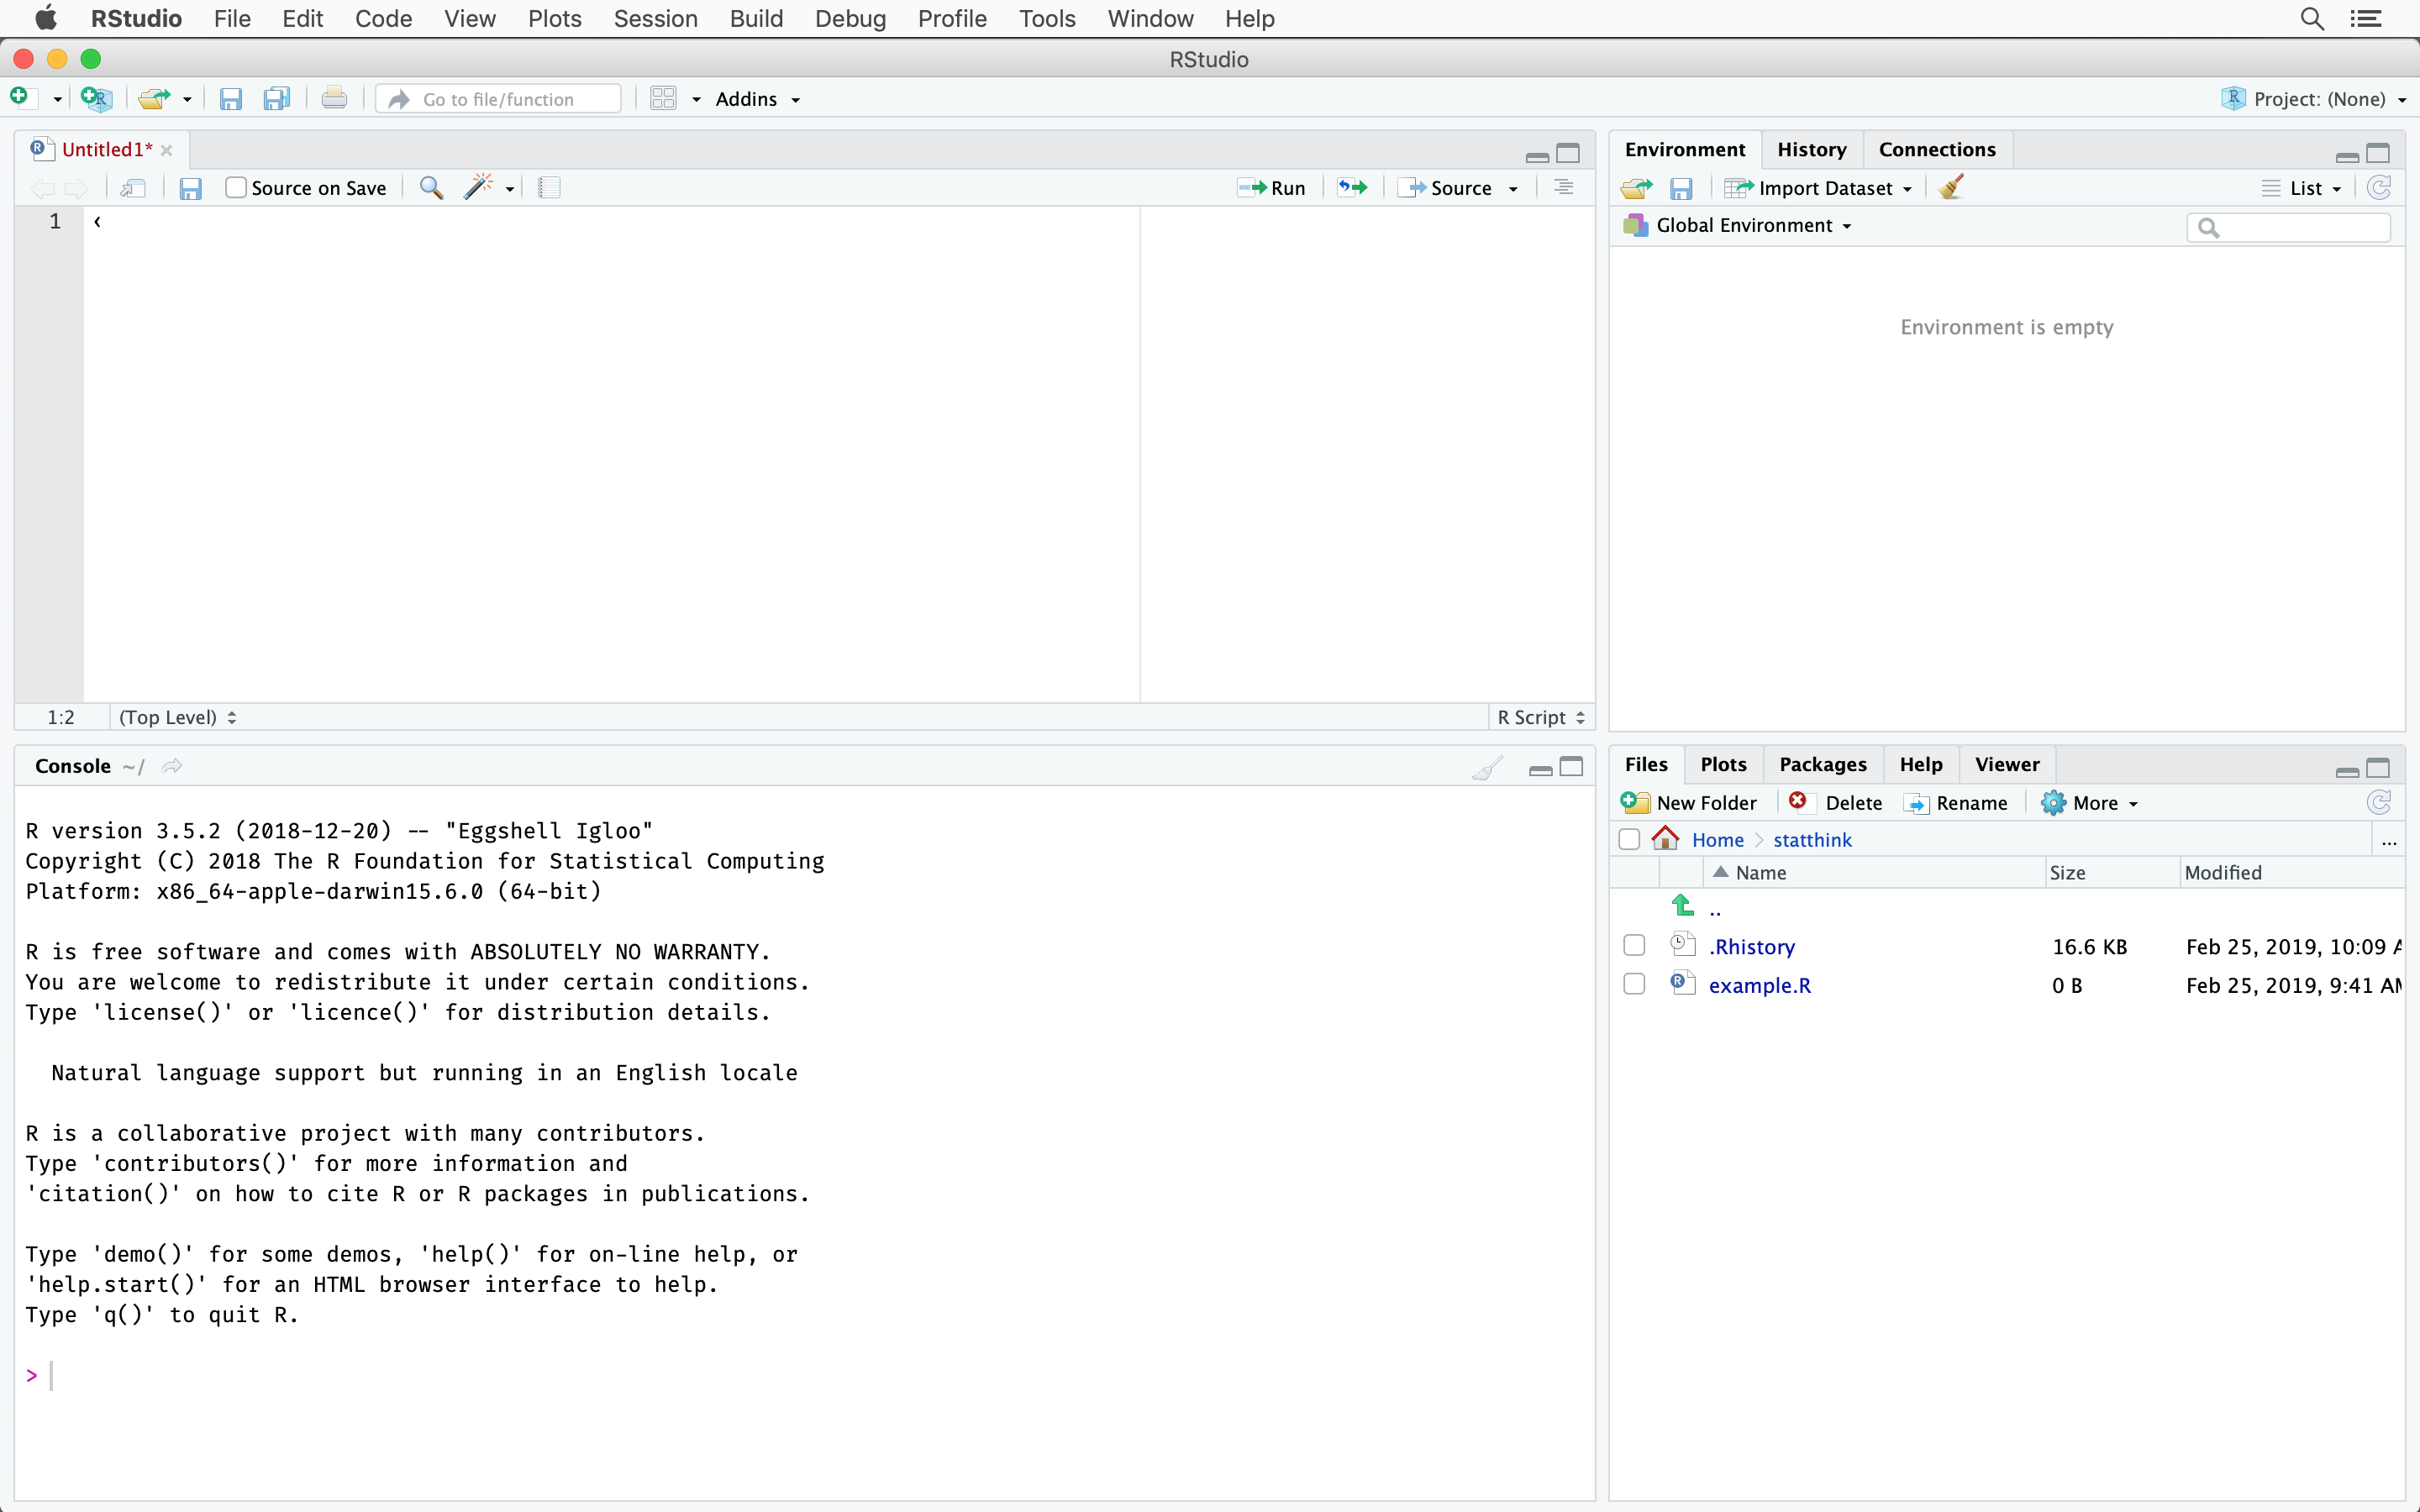 The RStudio interface